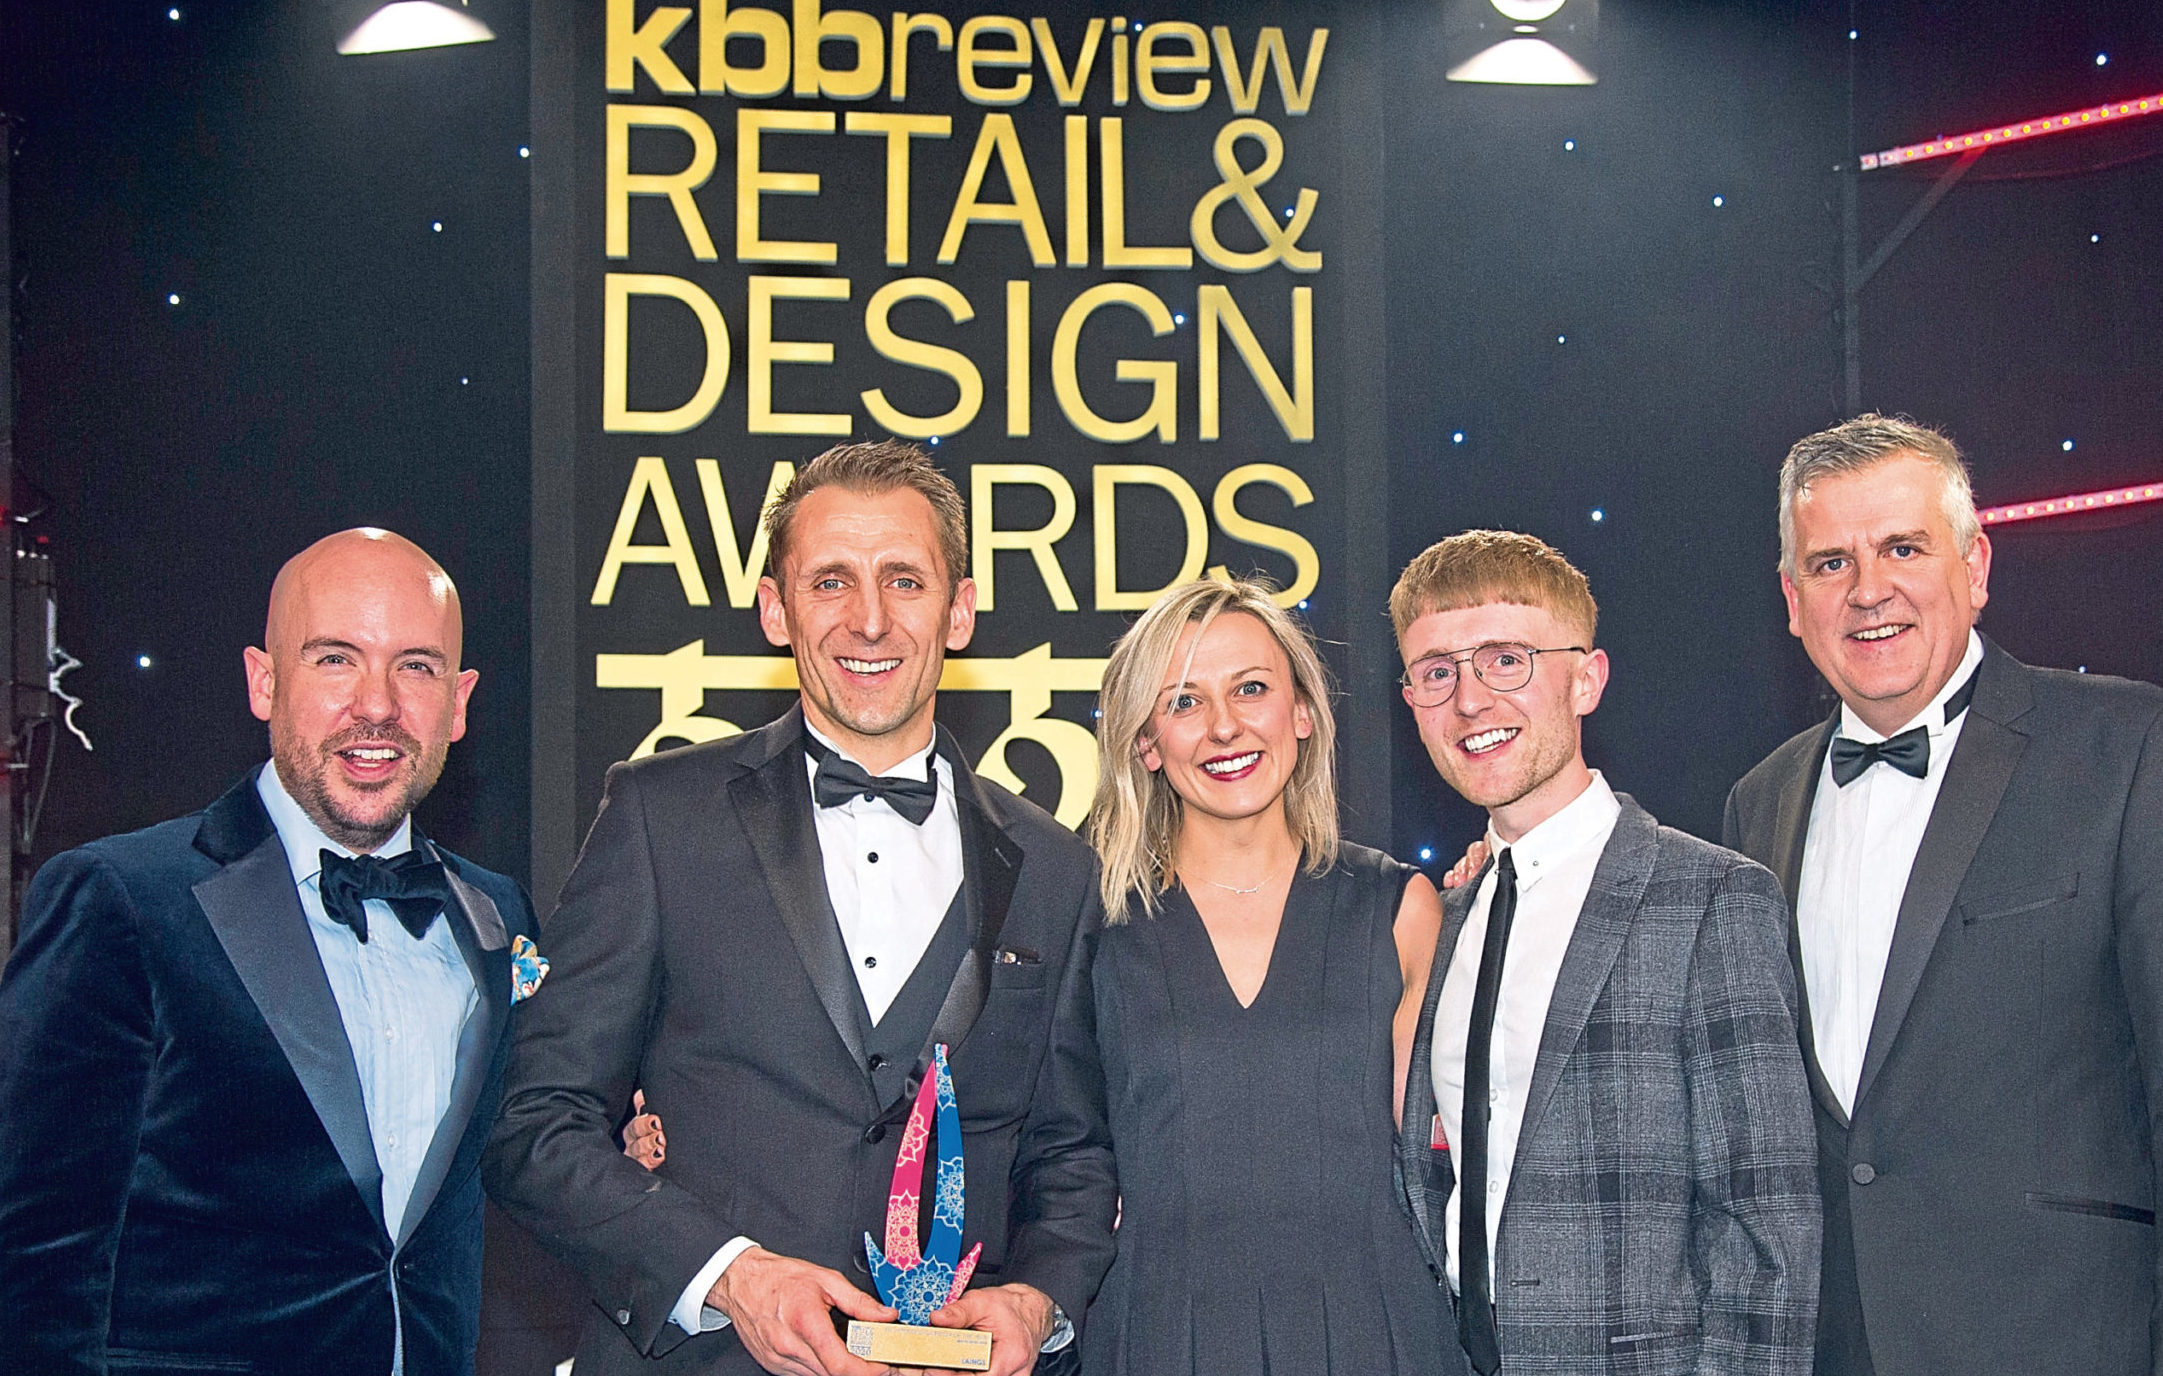 Pictured left to right are: Comedian Tom Allen, Darren Walker, Director, Laings, Claire McKay, Director, Laings, Mark Strachan, Principal Development Designer, Laings, and Darren Paxford, National Sales Manager, VitrA